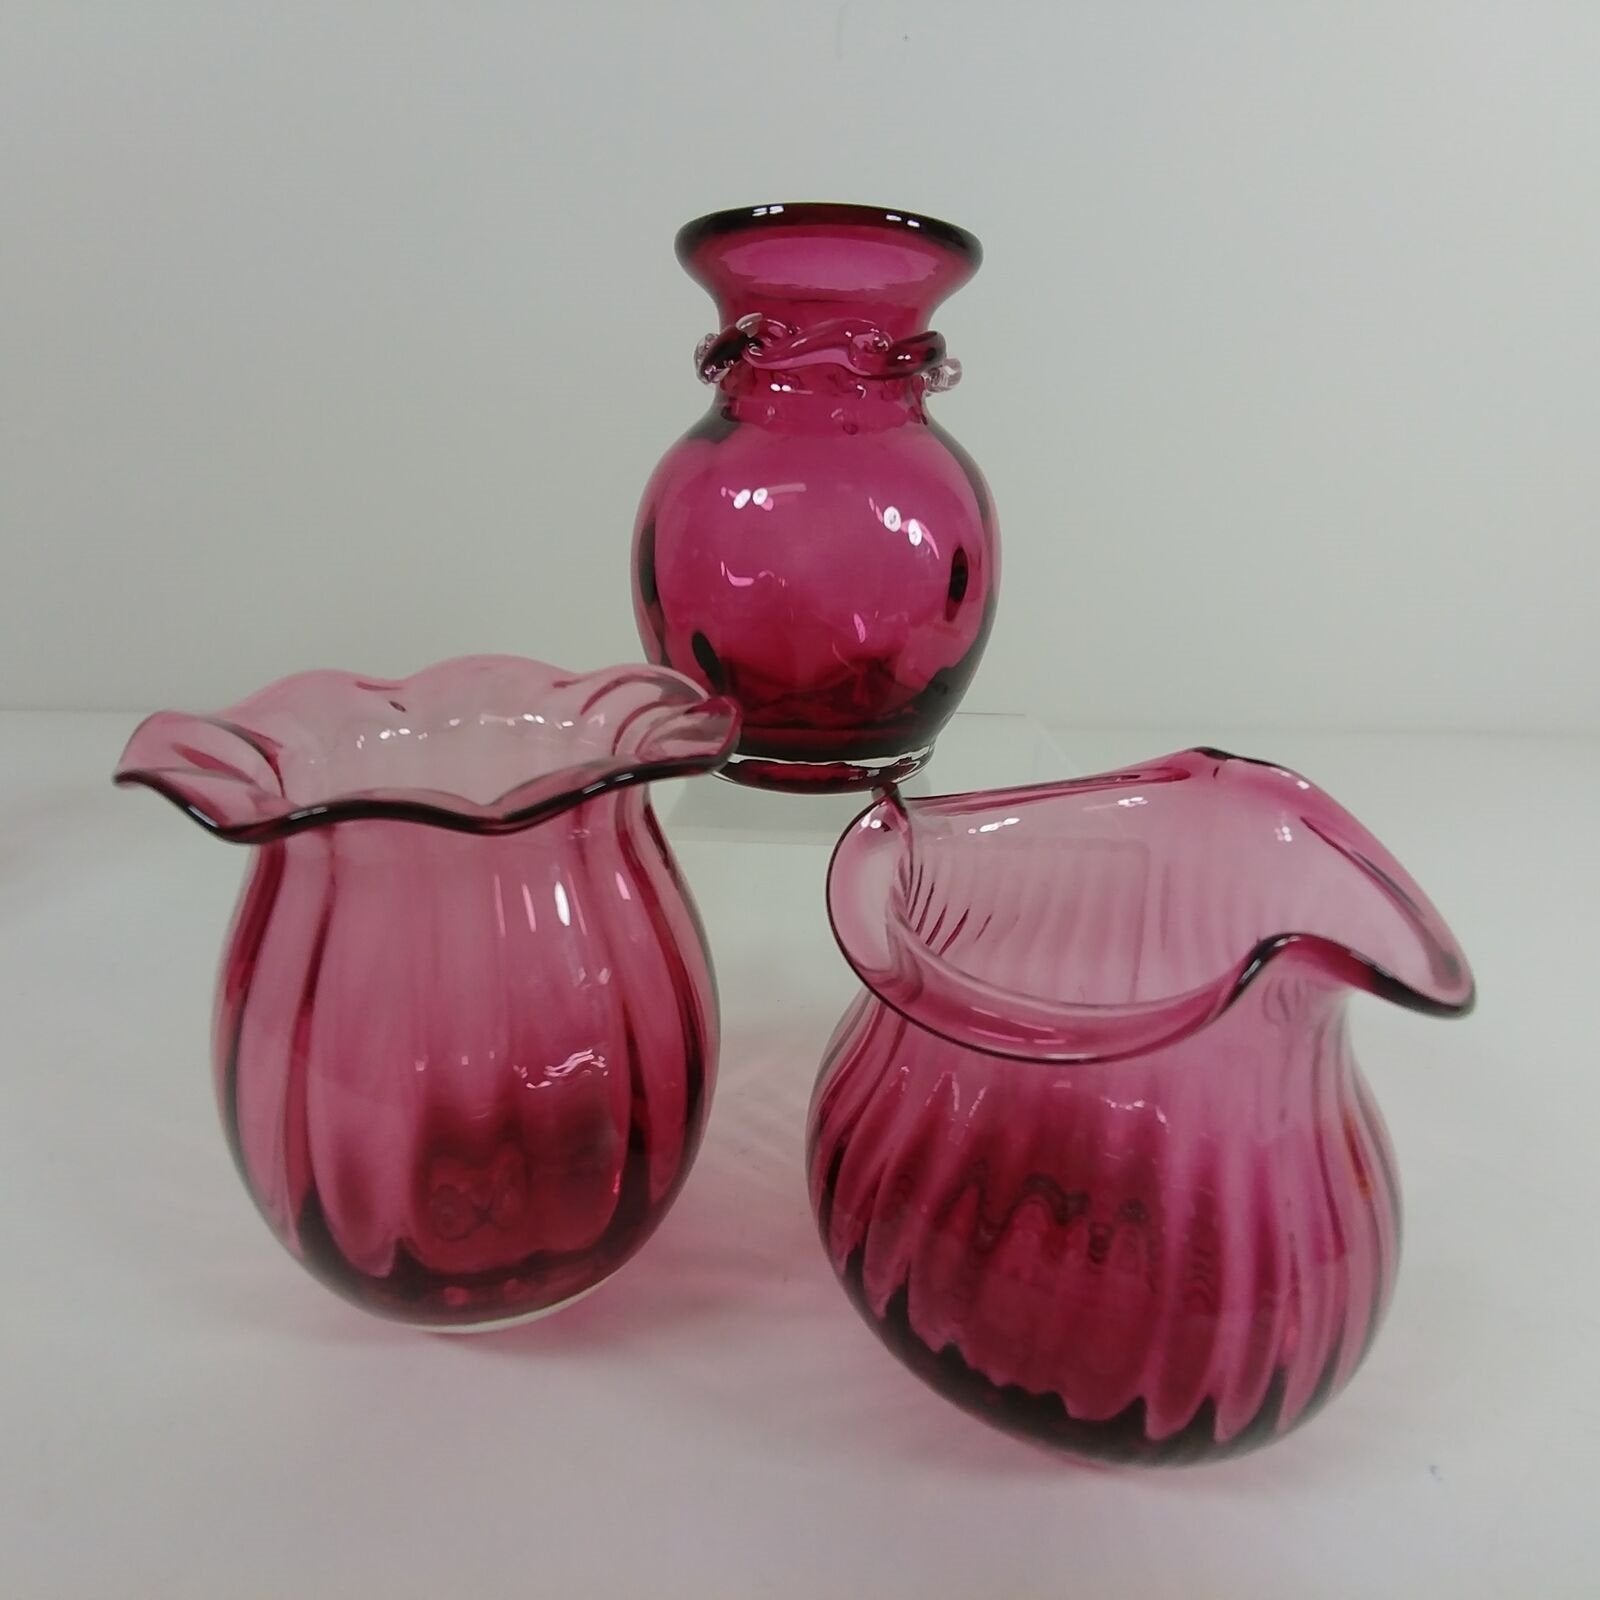 Cranberry Glass Vases 3 pc Lot Hand Blown with Pontil Marks 1 Stamped Pilgram